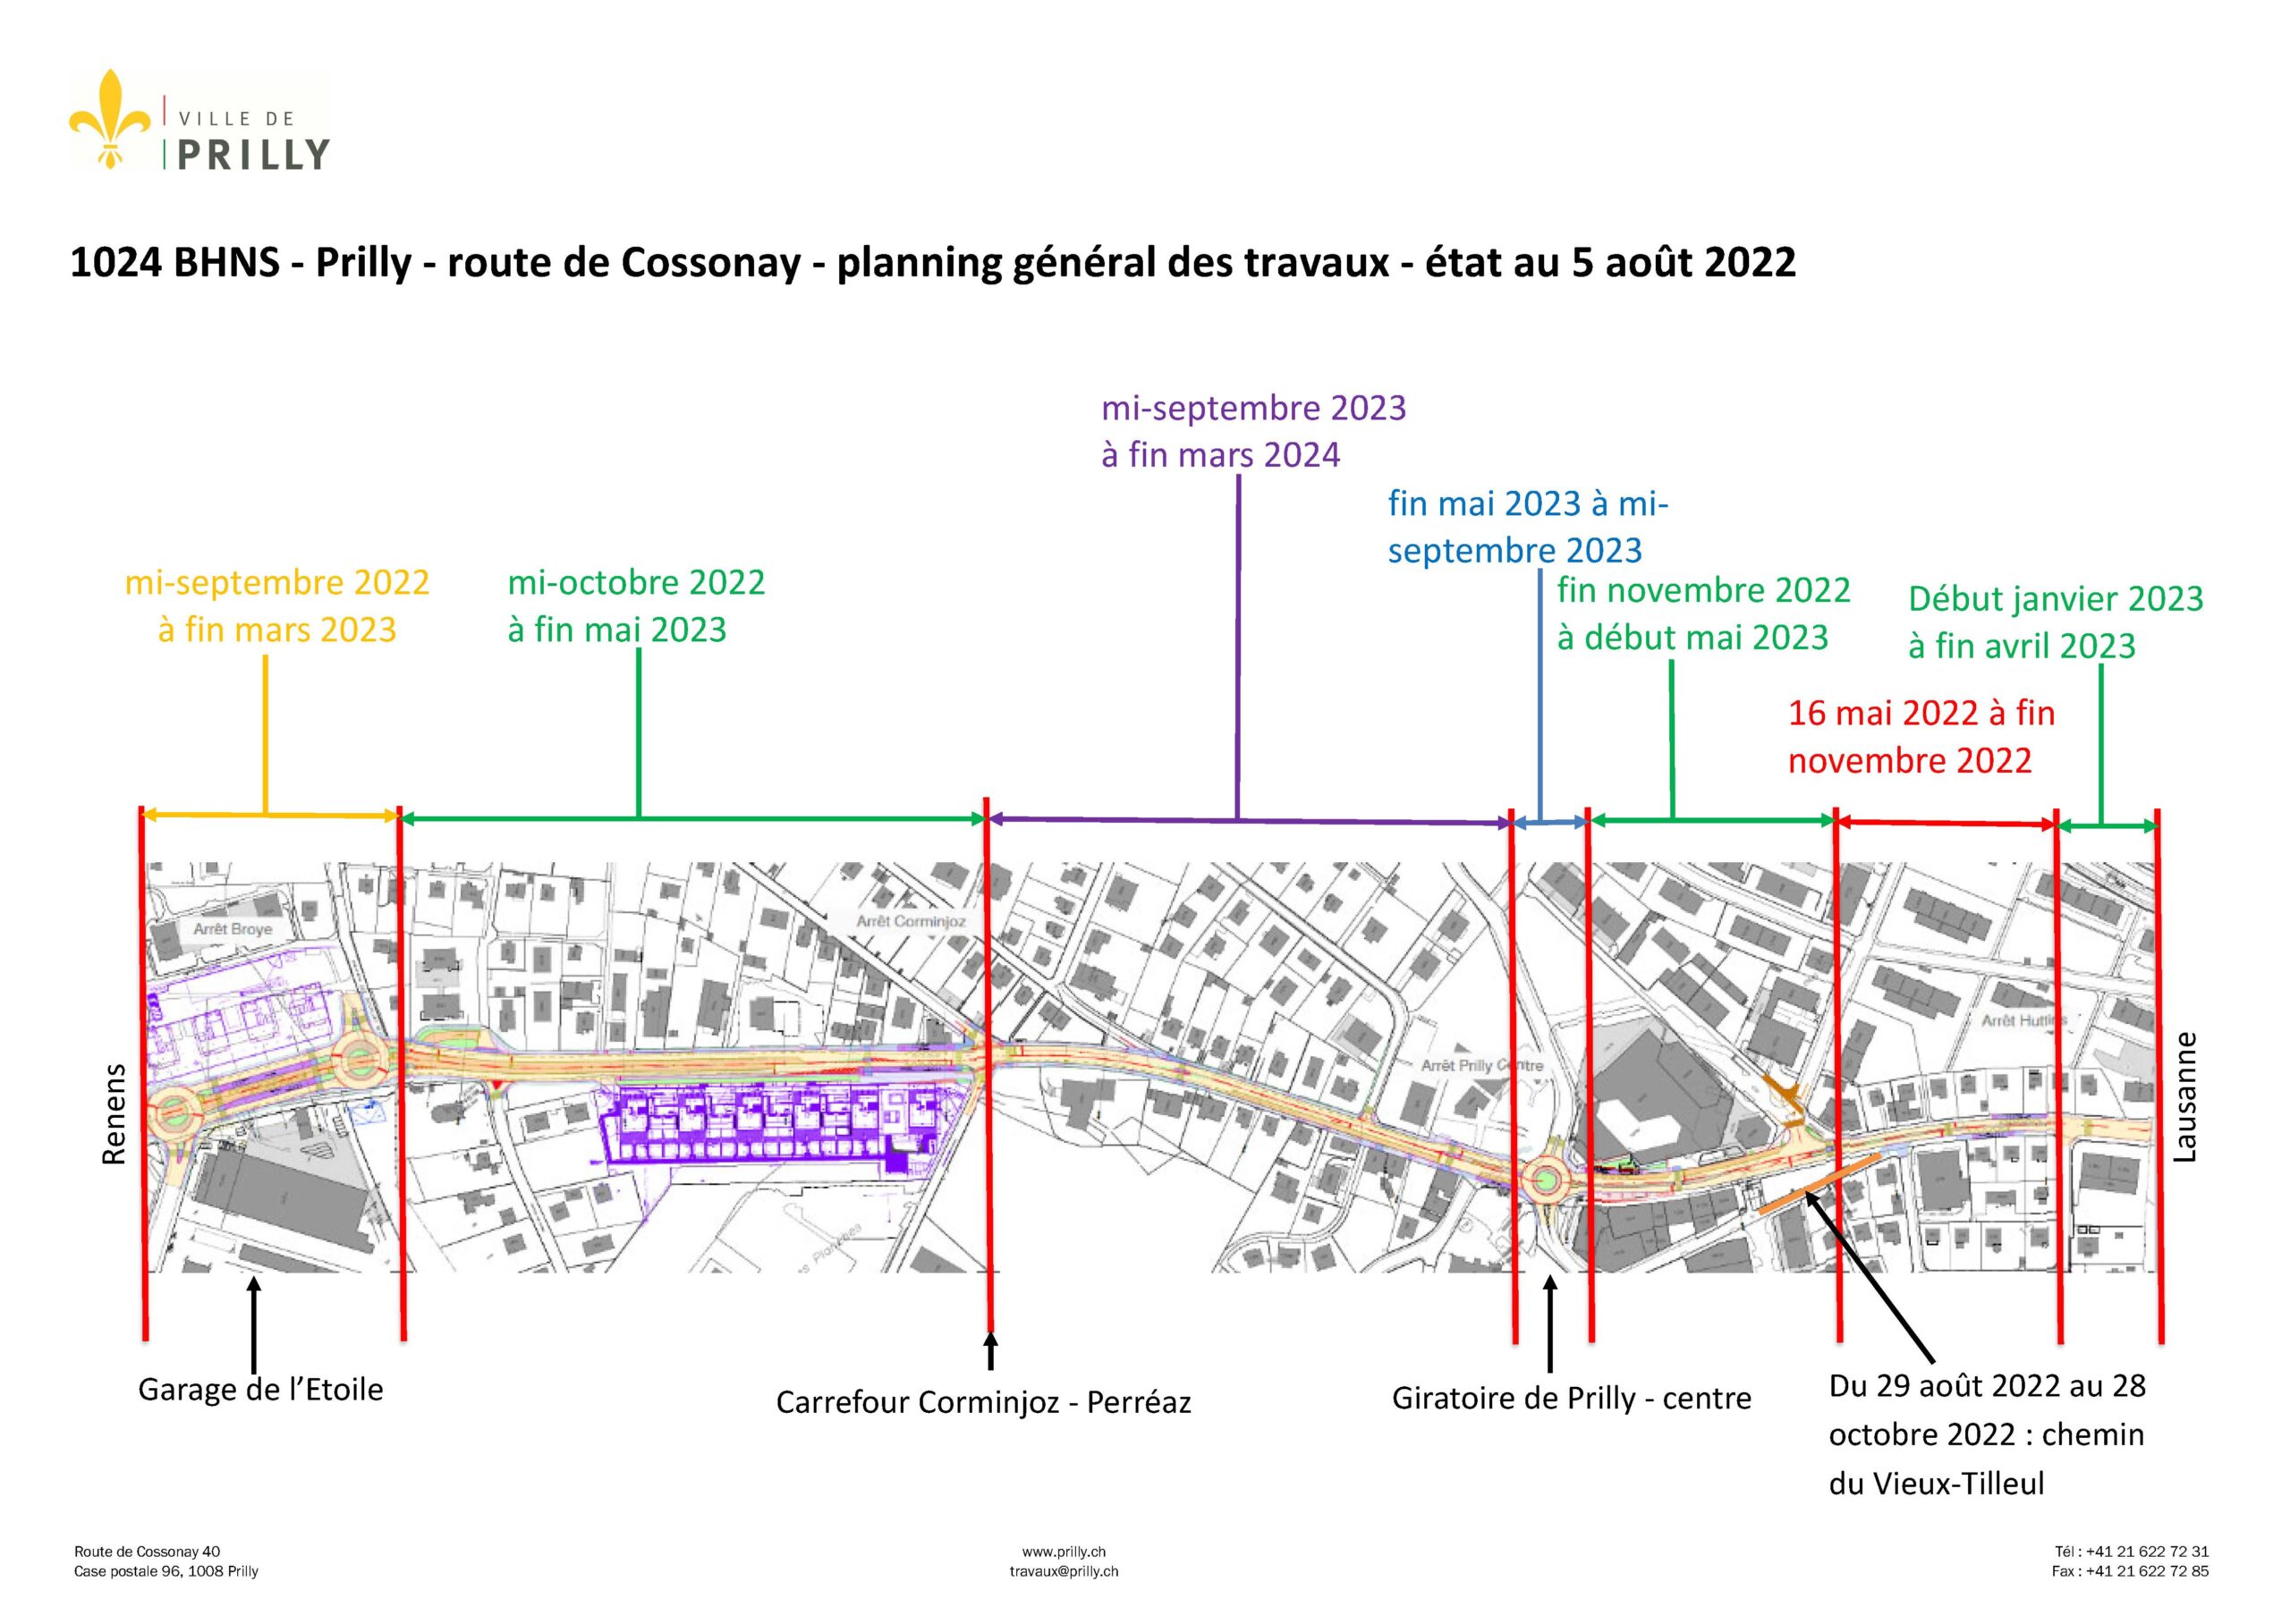 1024-BHNS-Prilly-Route-de-Cossonay-schema-planning-general-20220805